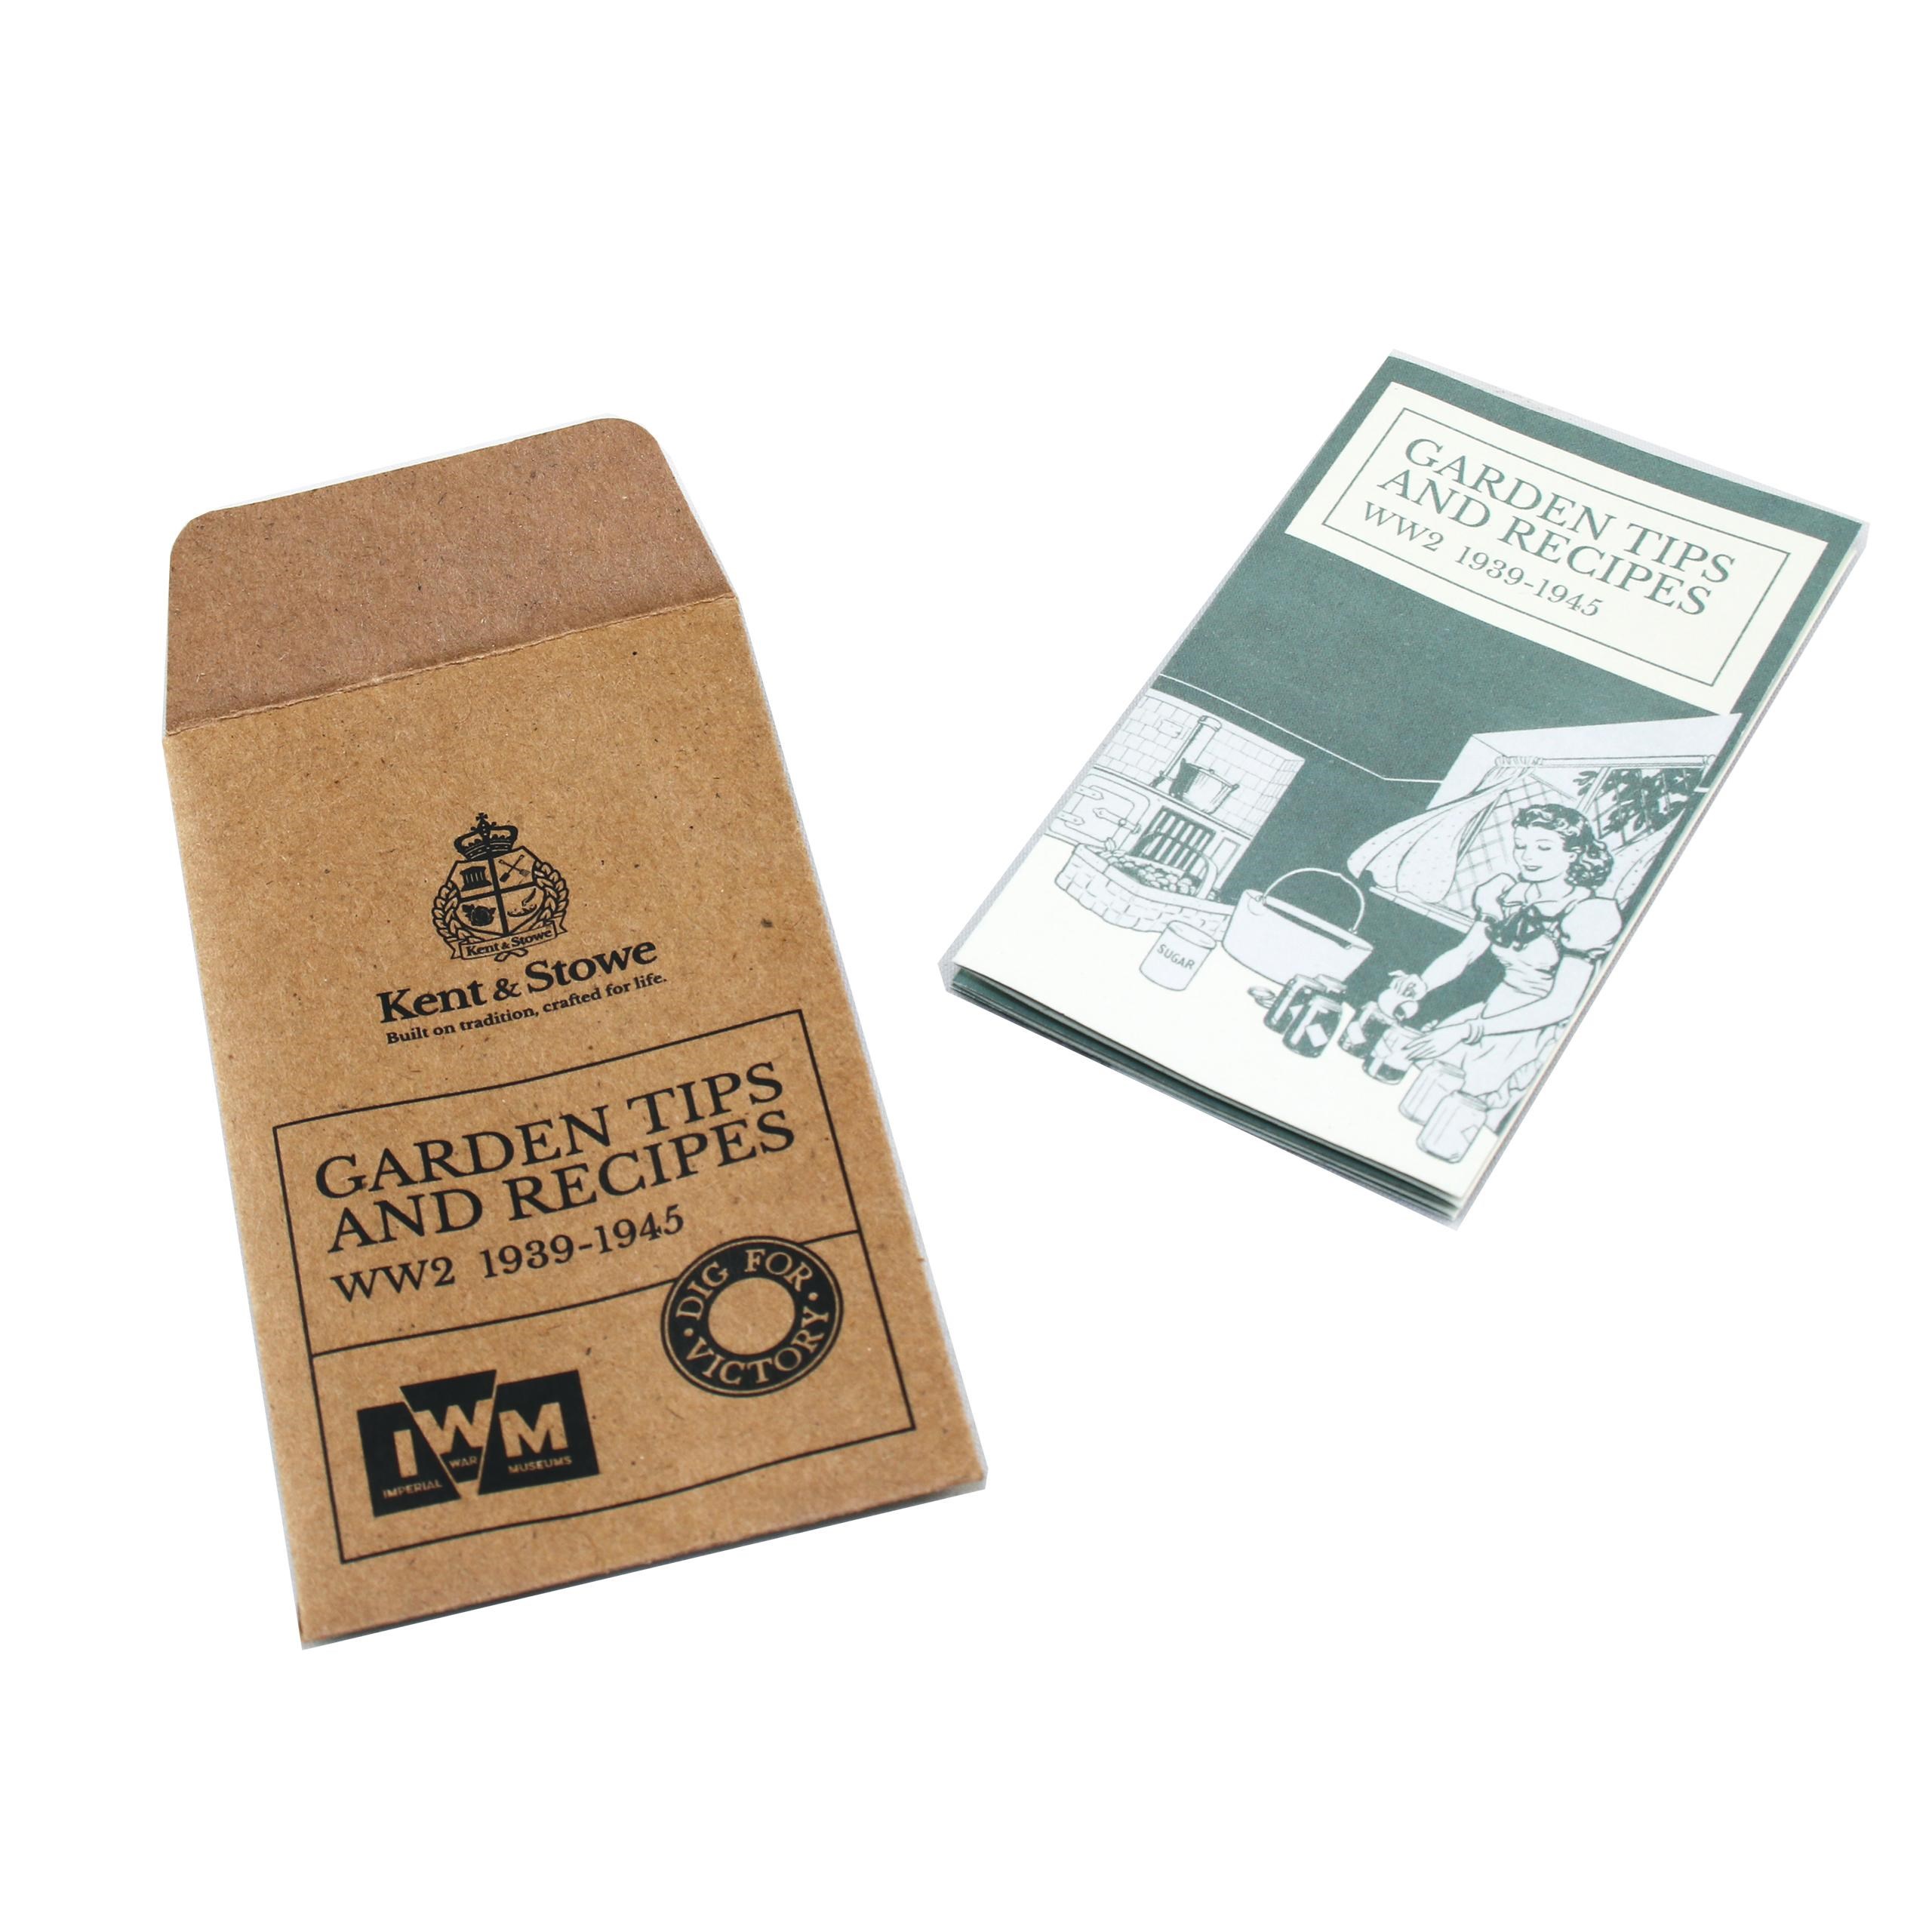 101cm Dig For Victory Home & Garden Carrier Apron by Kent & Stowe